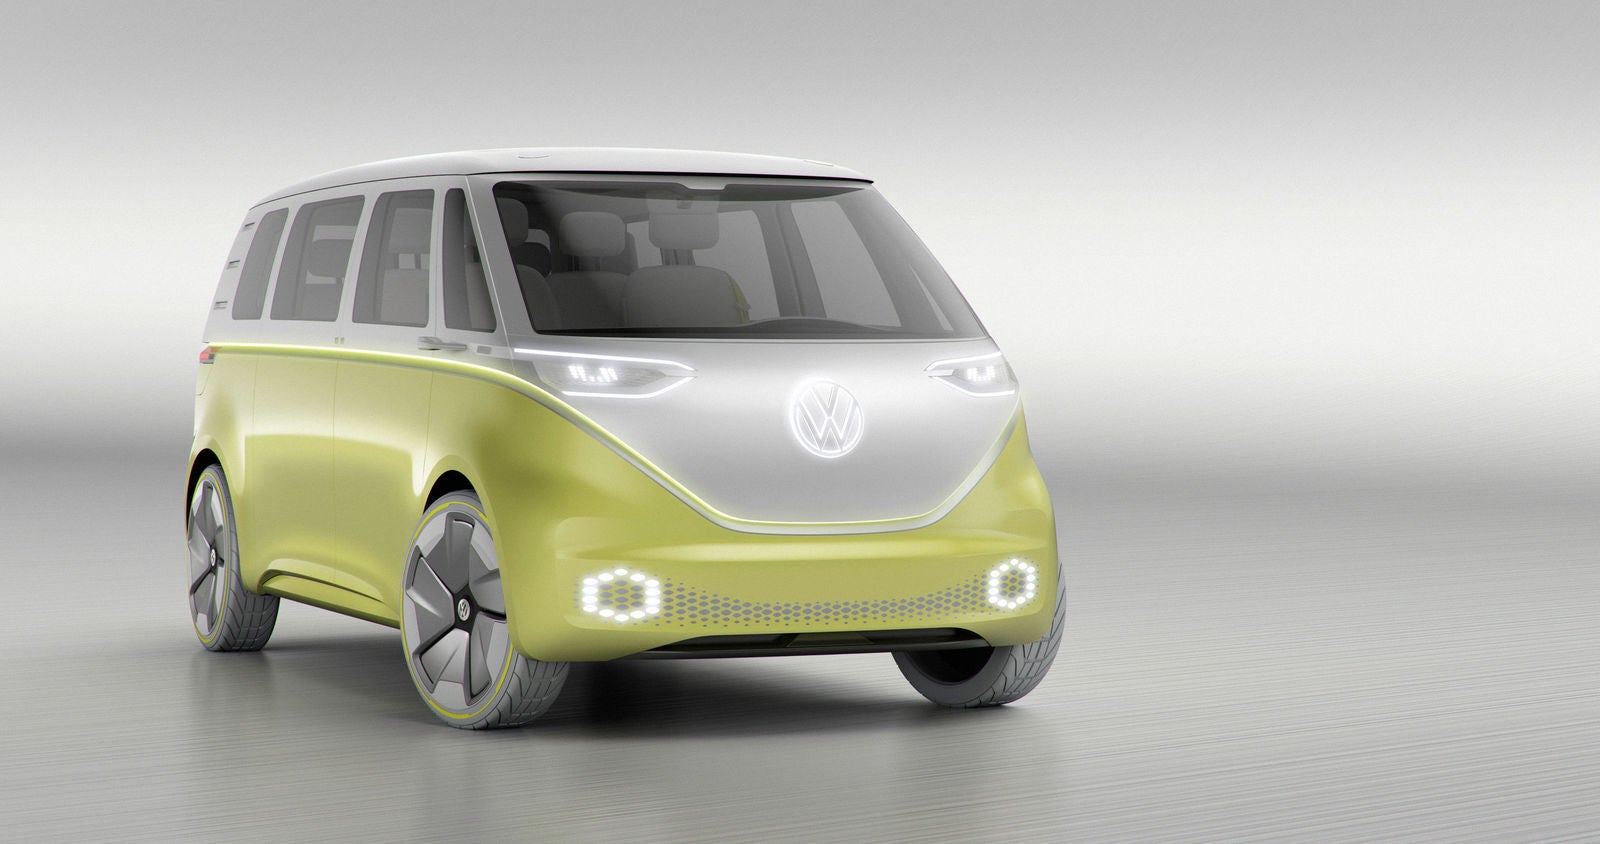 At one point, the Apple Car would have resembled the 2017 VW ID Buzz prototype - The Apple Car could have changed the face of the auto industry